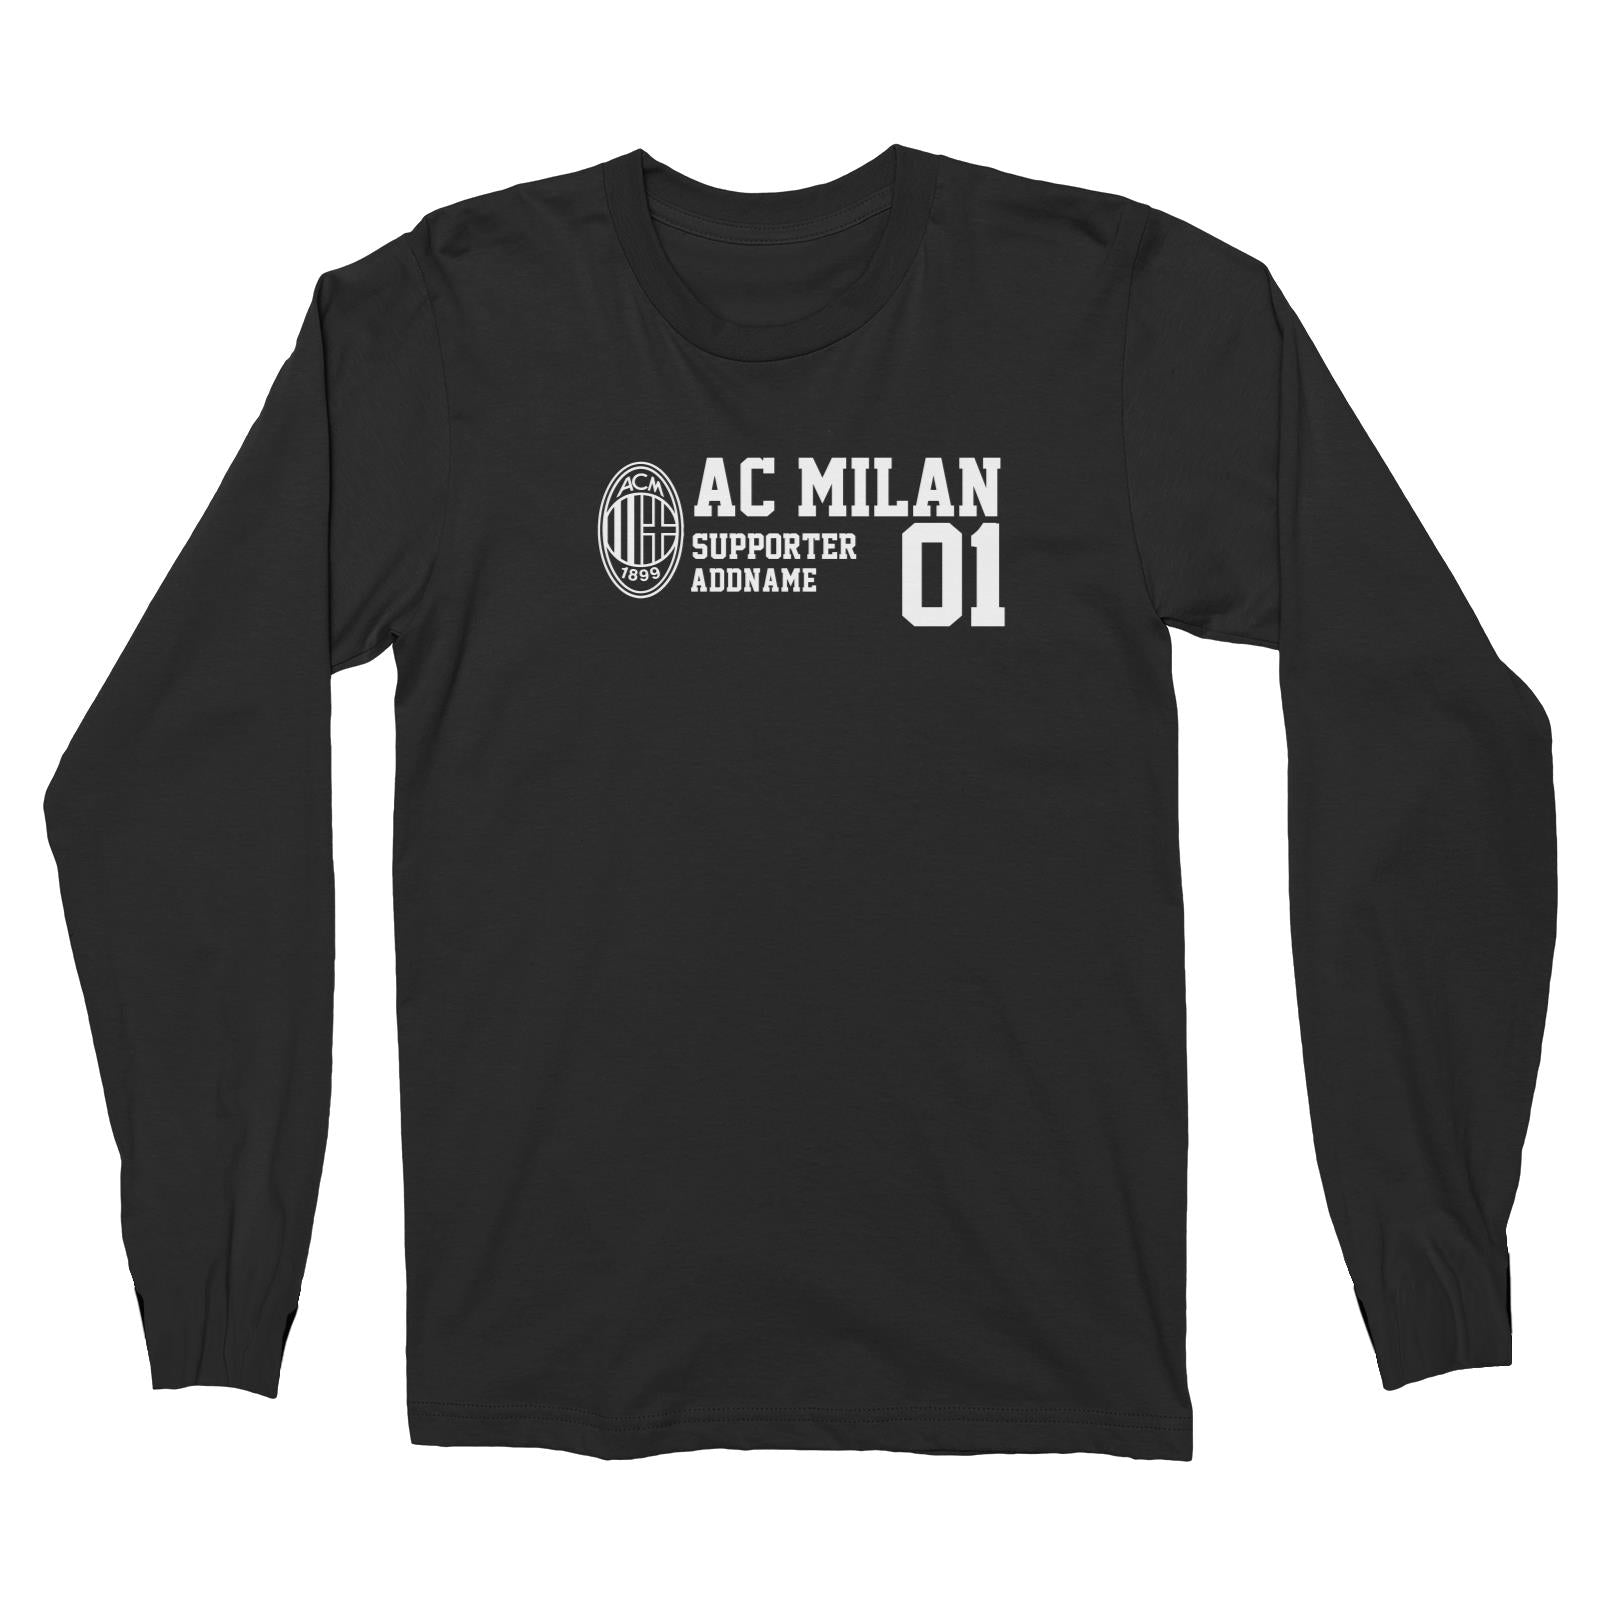 AC Milan Football Supporter Addname Long Sleeve Unisex T-Shirt